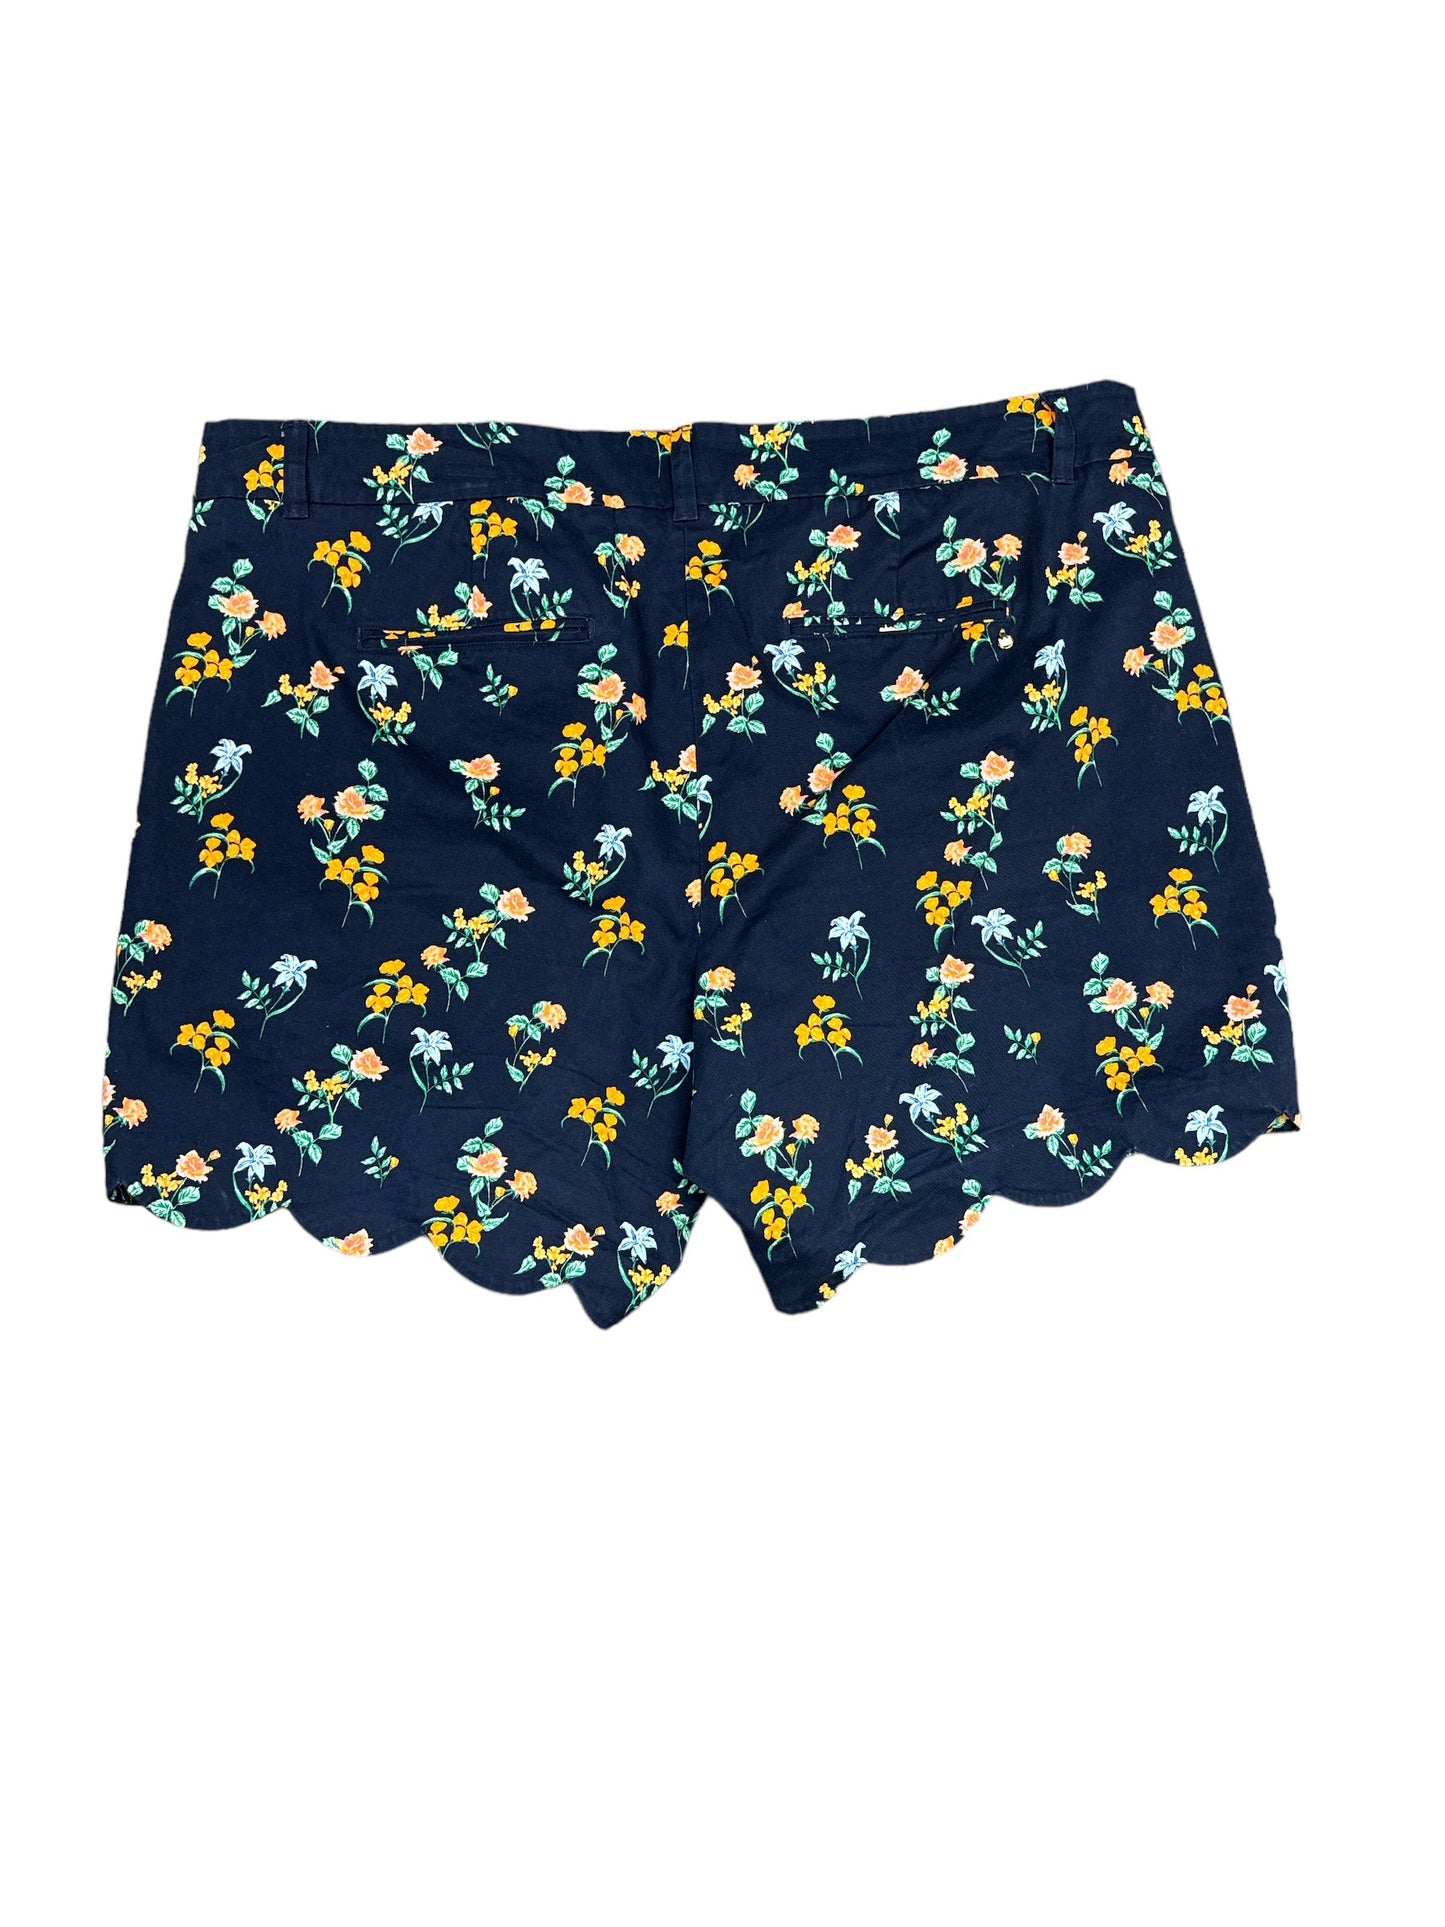 Shorts By Crown And Ivy  Size: 20